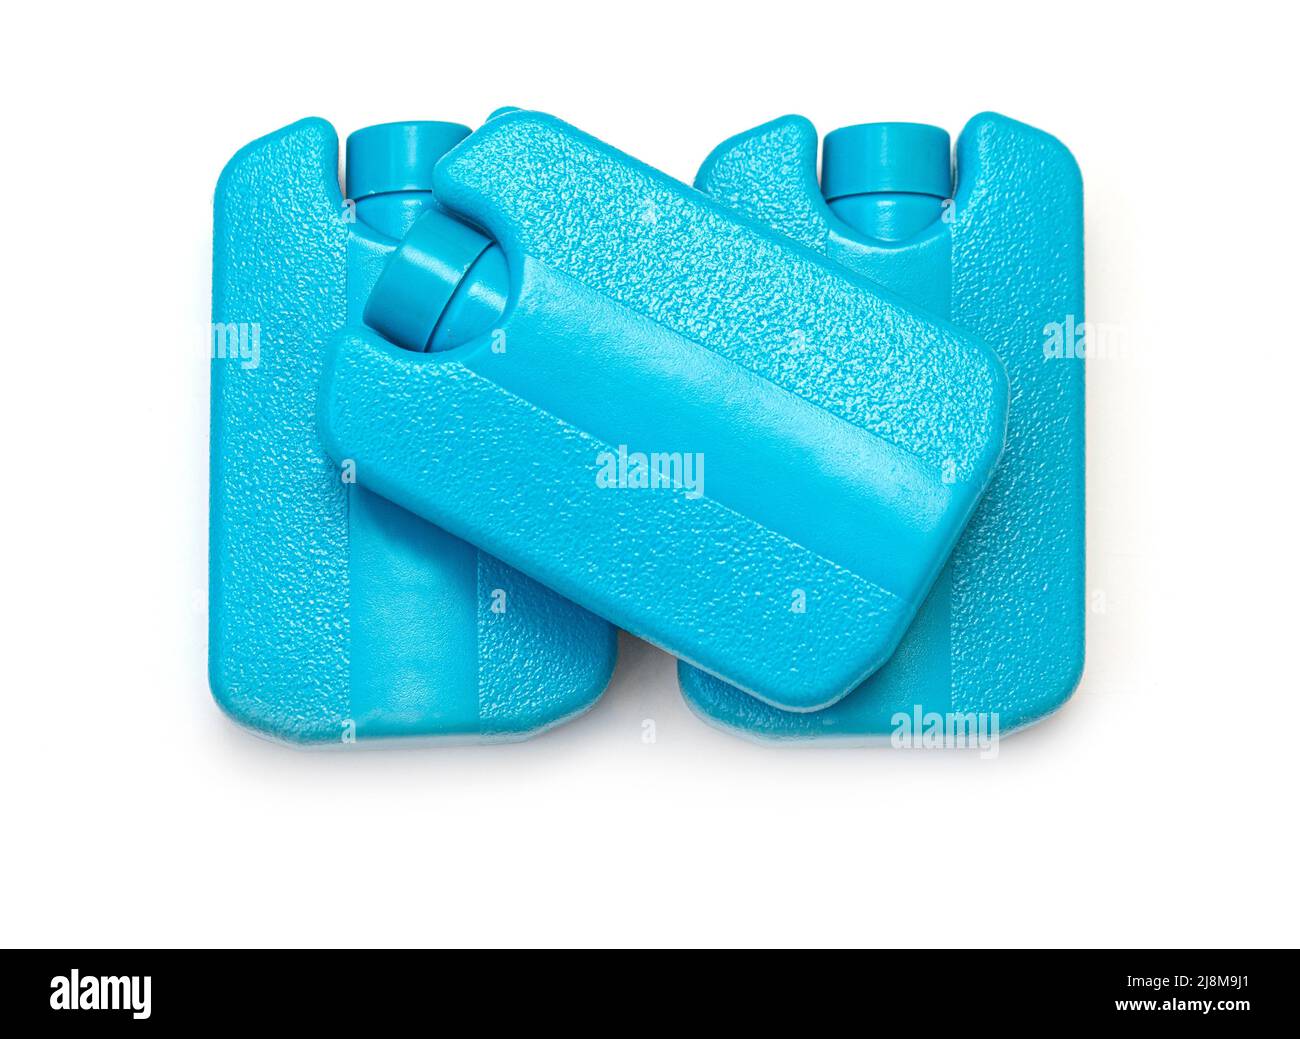 https://c8.alamy.com/comp/2J8M9J1/blue-plastic-freezer-element-with-gel-for-keeping-food-cool-in-cool-bag-isolated-on-the-white-background-2J8M9J1.jpg